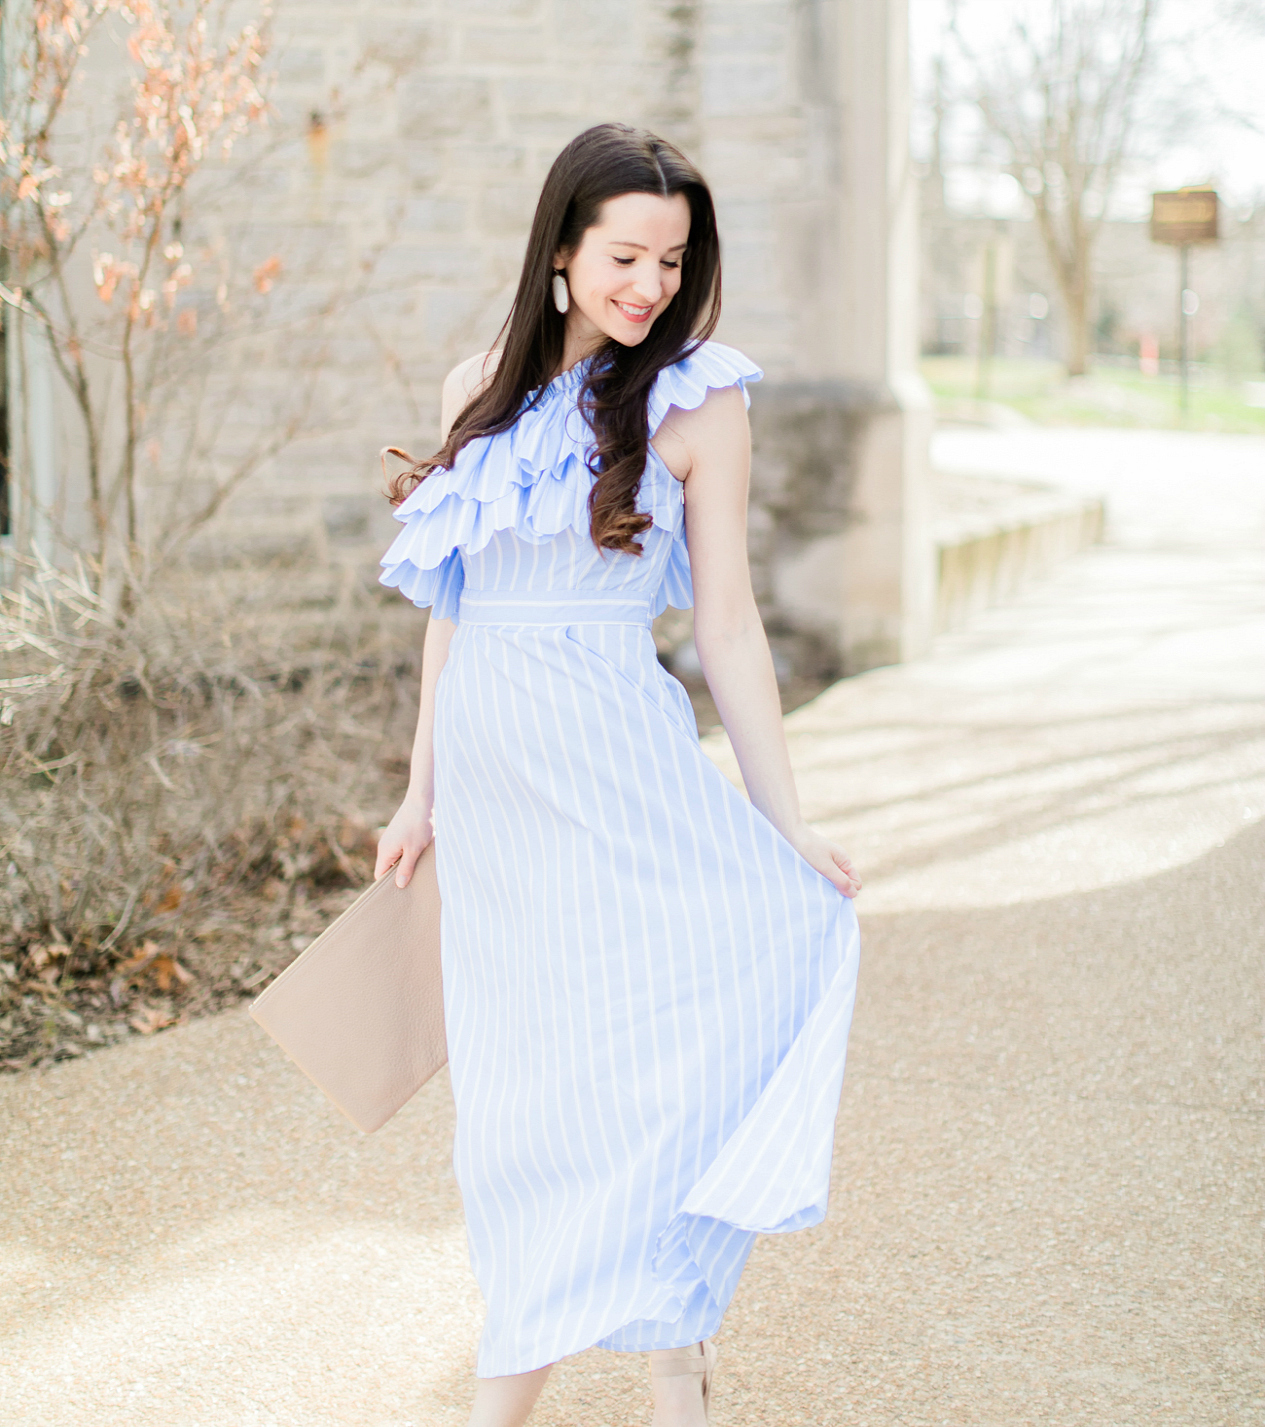 Best Dresses to Wear to a Spring Wedding by southern fashion blogger Stephanie Ziajka from Diary of a Debutante, spring wedding guest outfits, wedding guest dress ideas, dresses to wear to a spring wedding, blue striped double ruffle midi dress